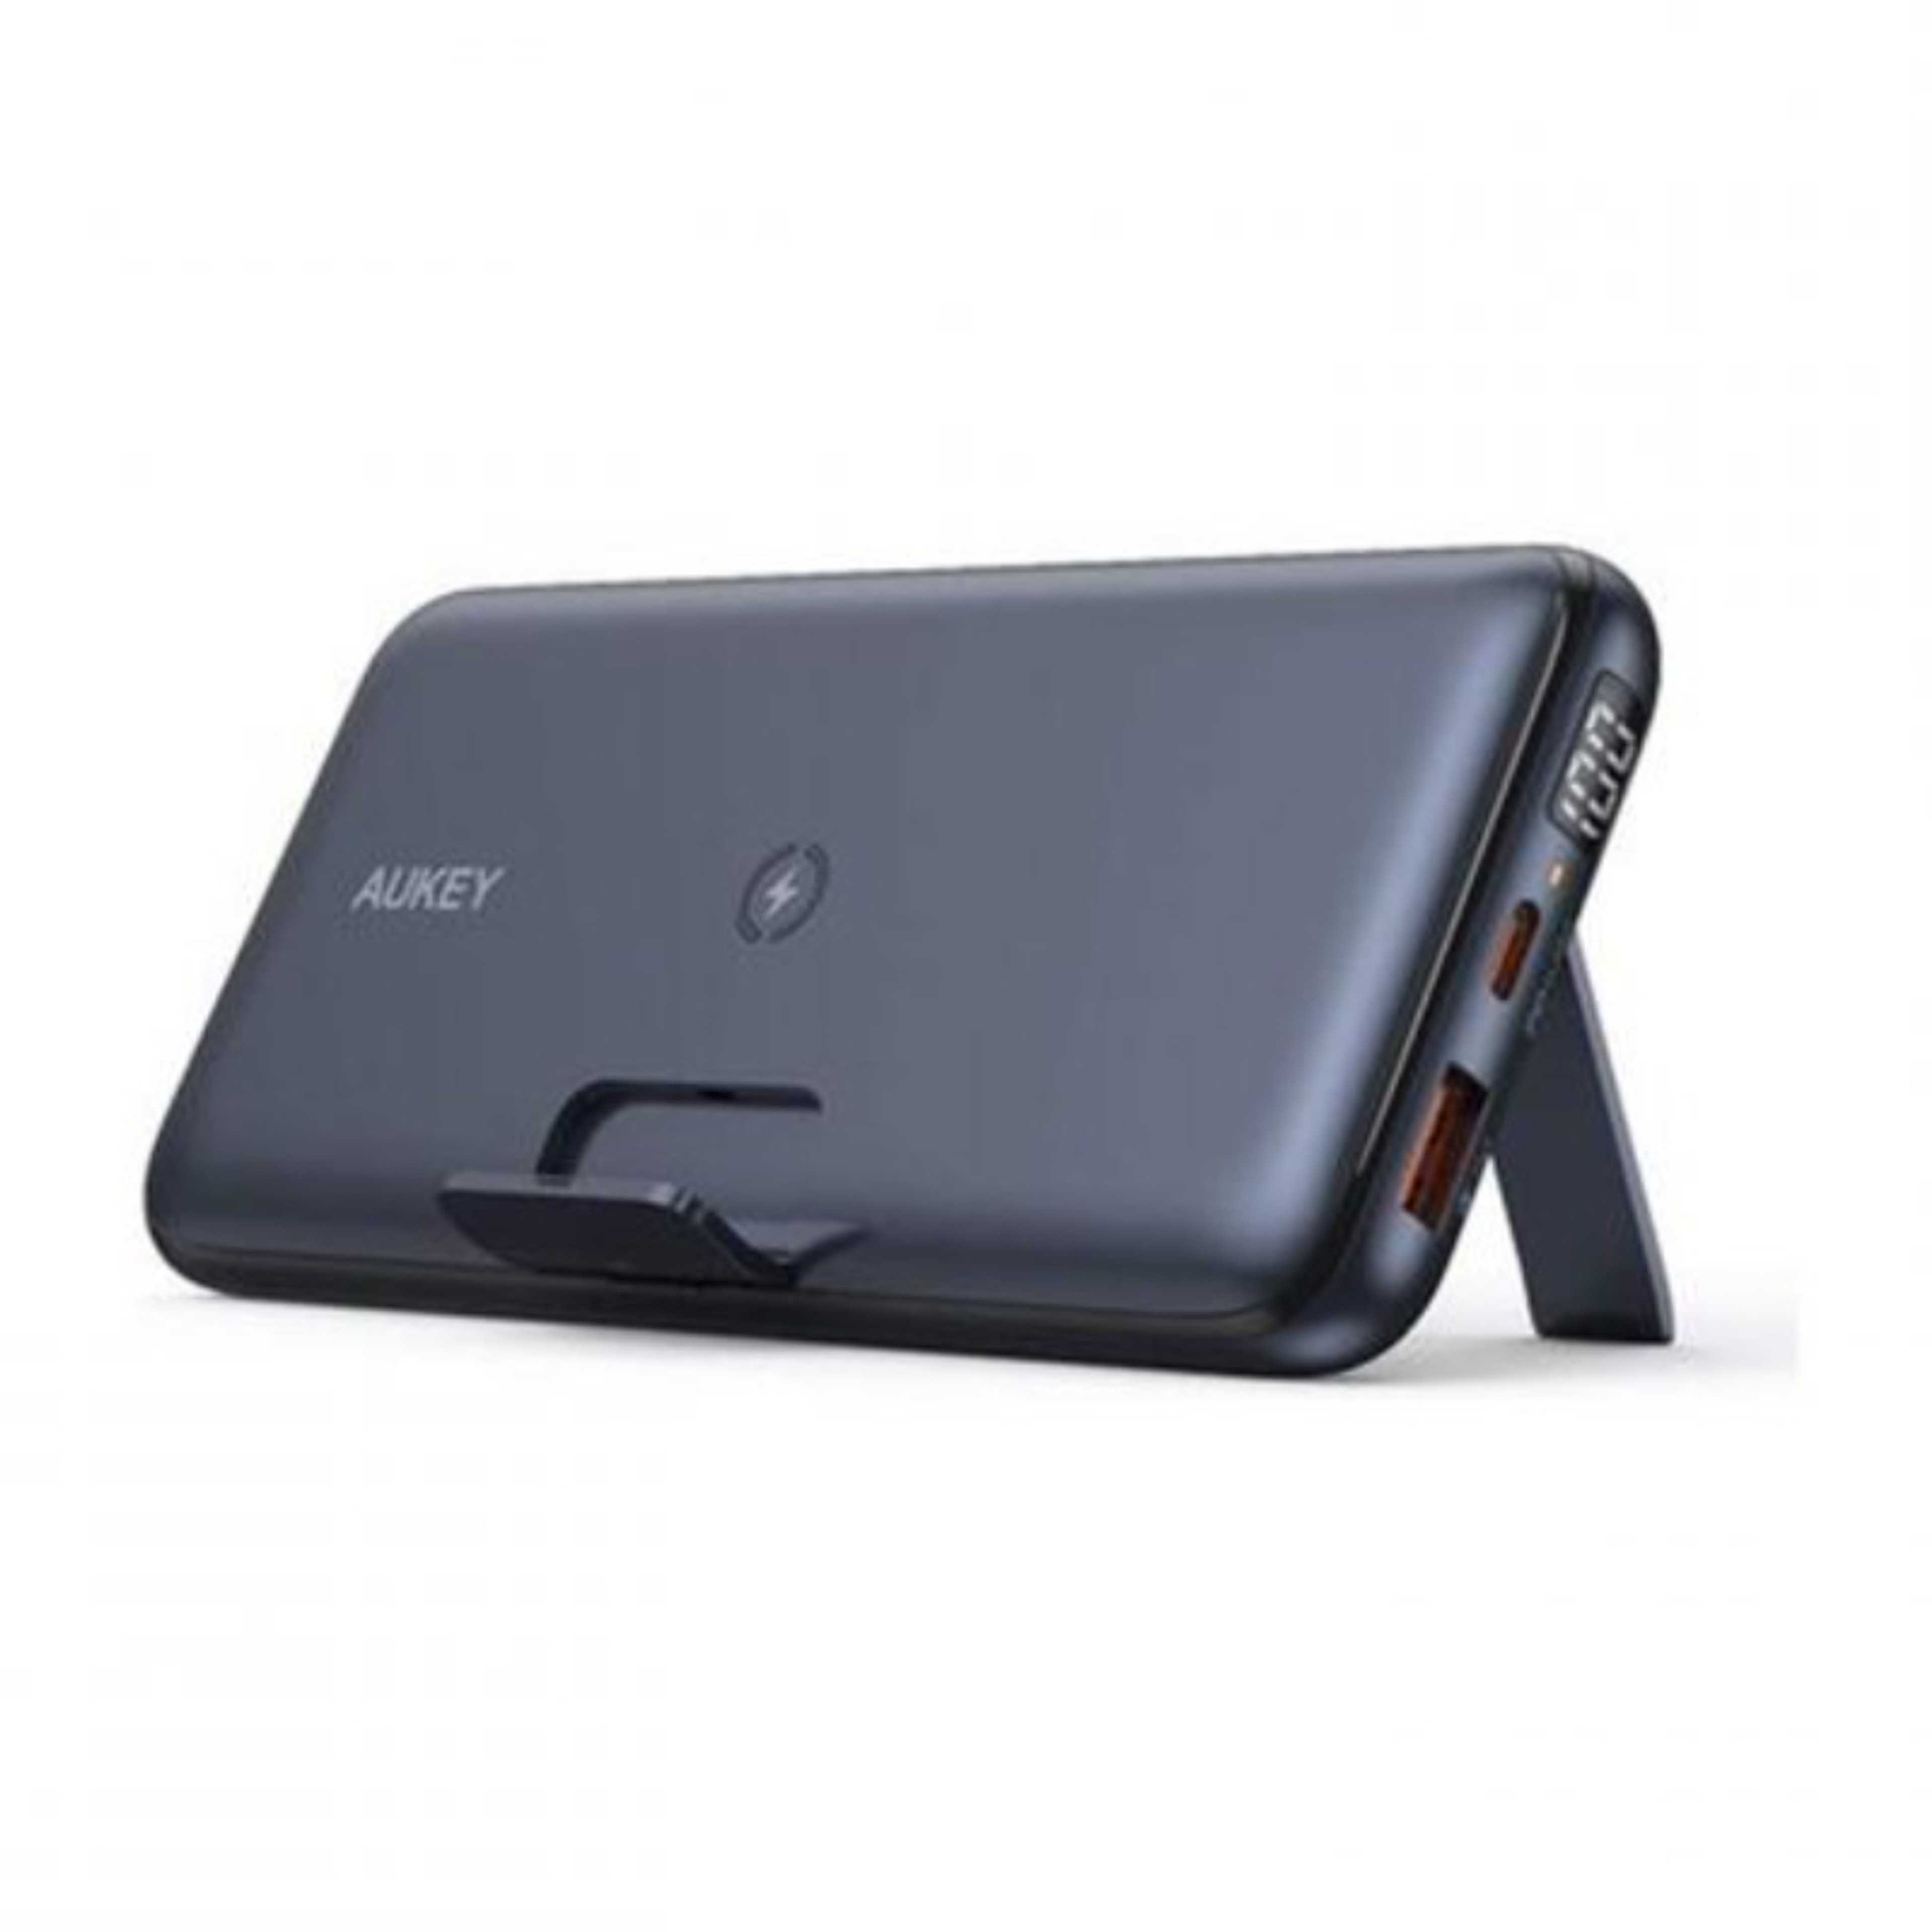 AUKEY PB-WL03S – 20000mAh Power Bank With Foldable Stand & 10W Wireless Charging